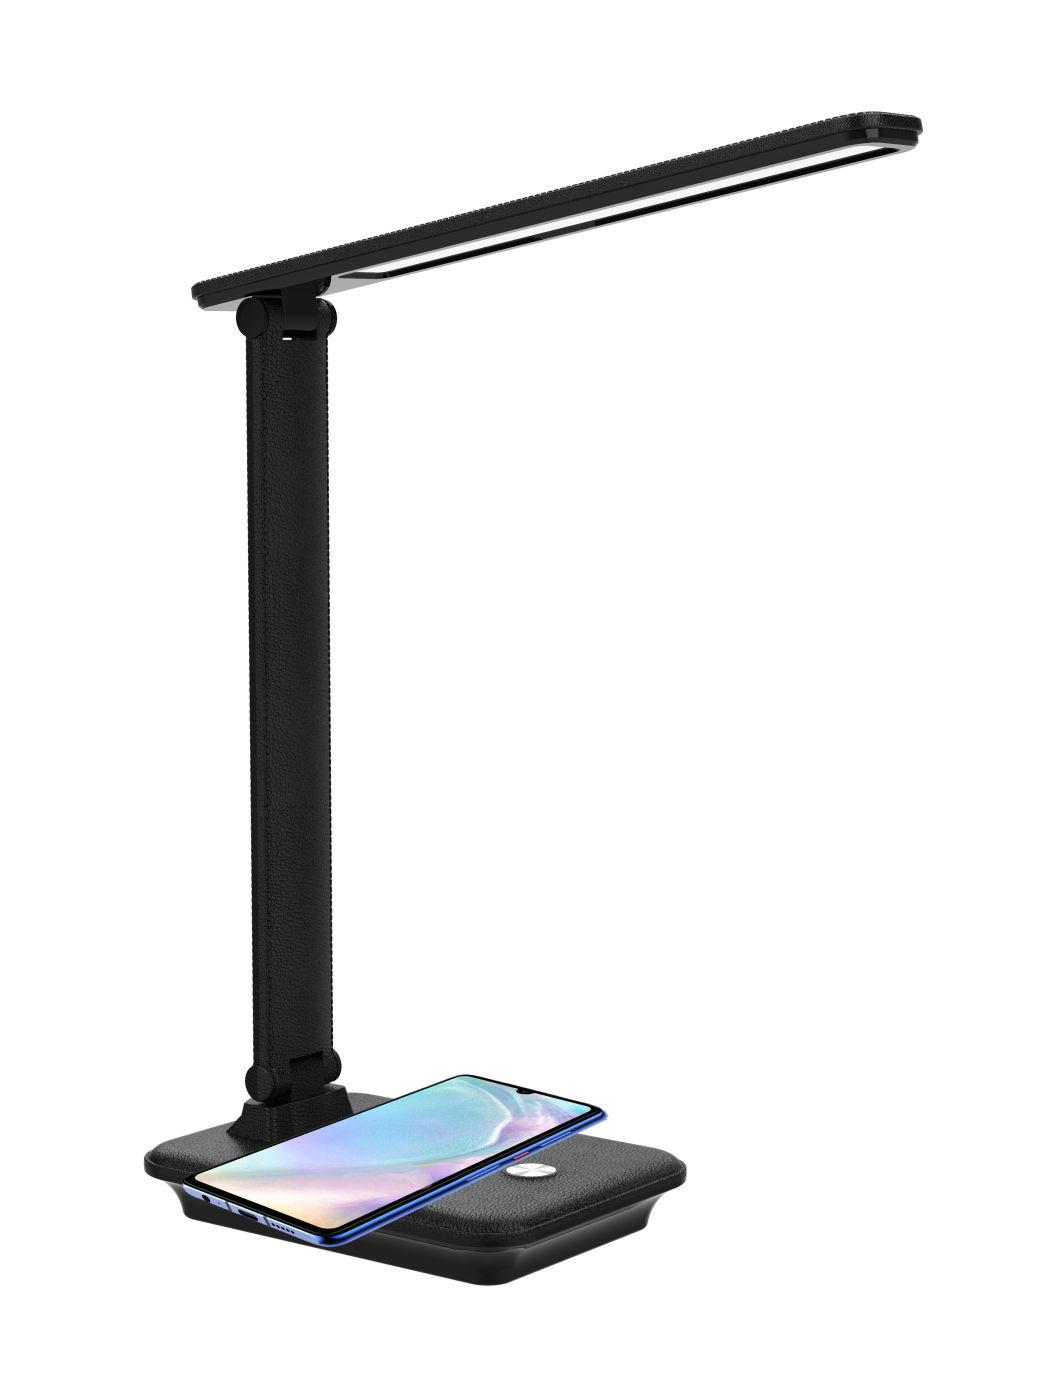 Table Lamp for LED Desk Lamp with USB Charging Port